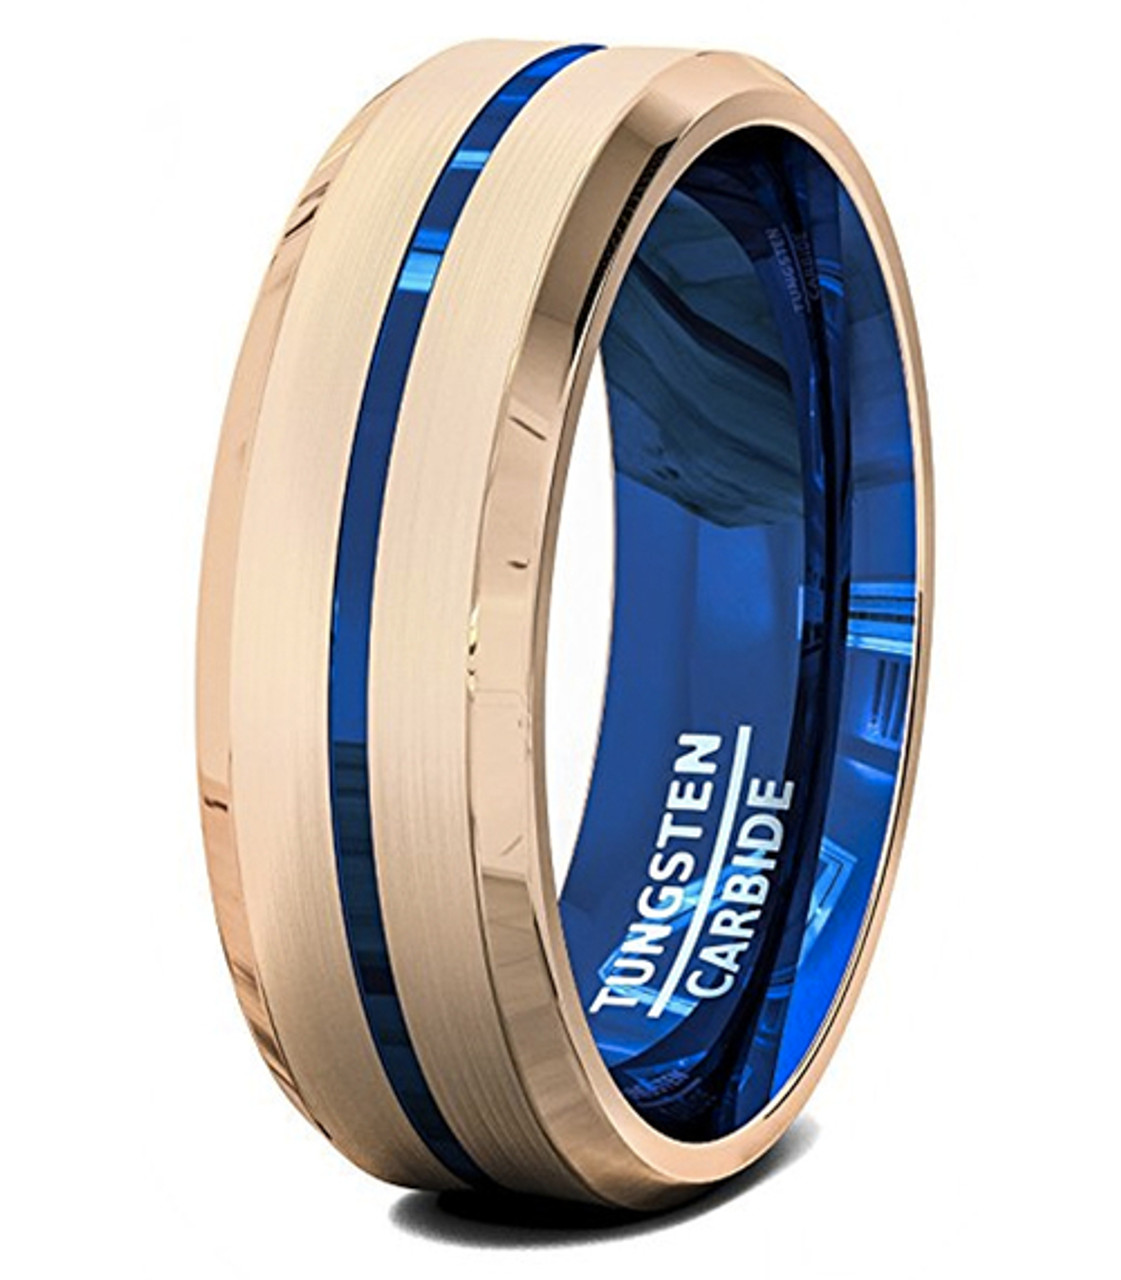 (8mm) Unisex or Men's Tungsten Carbide Wedding Ring Band. Matte Finish Rose Gold Band with Blue Line Groove. High Polish Inside Blue Tone.